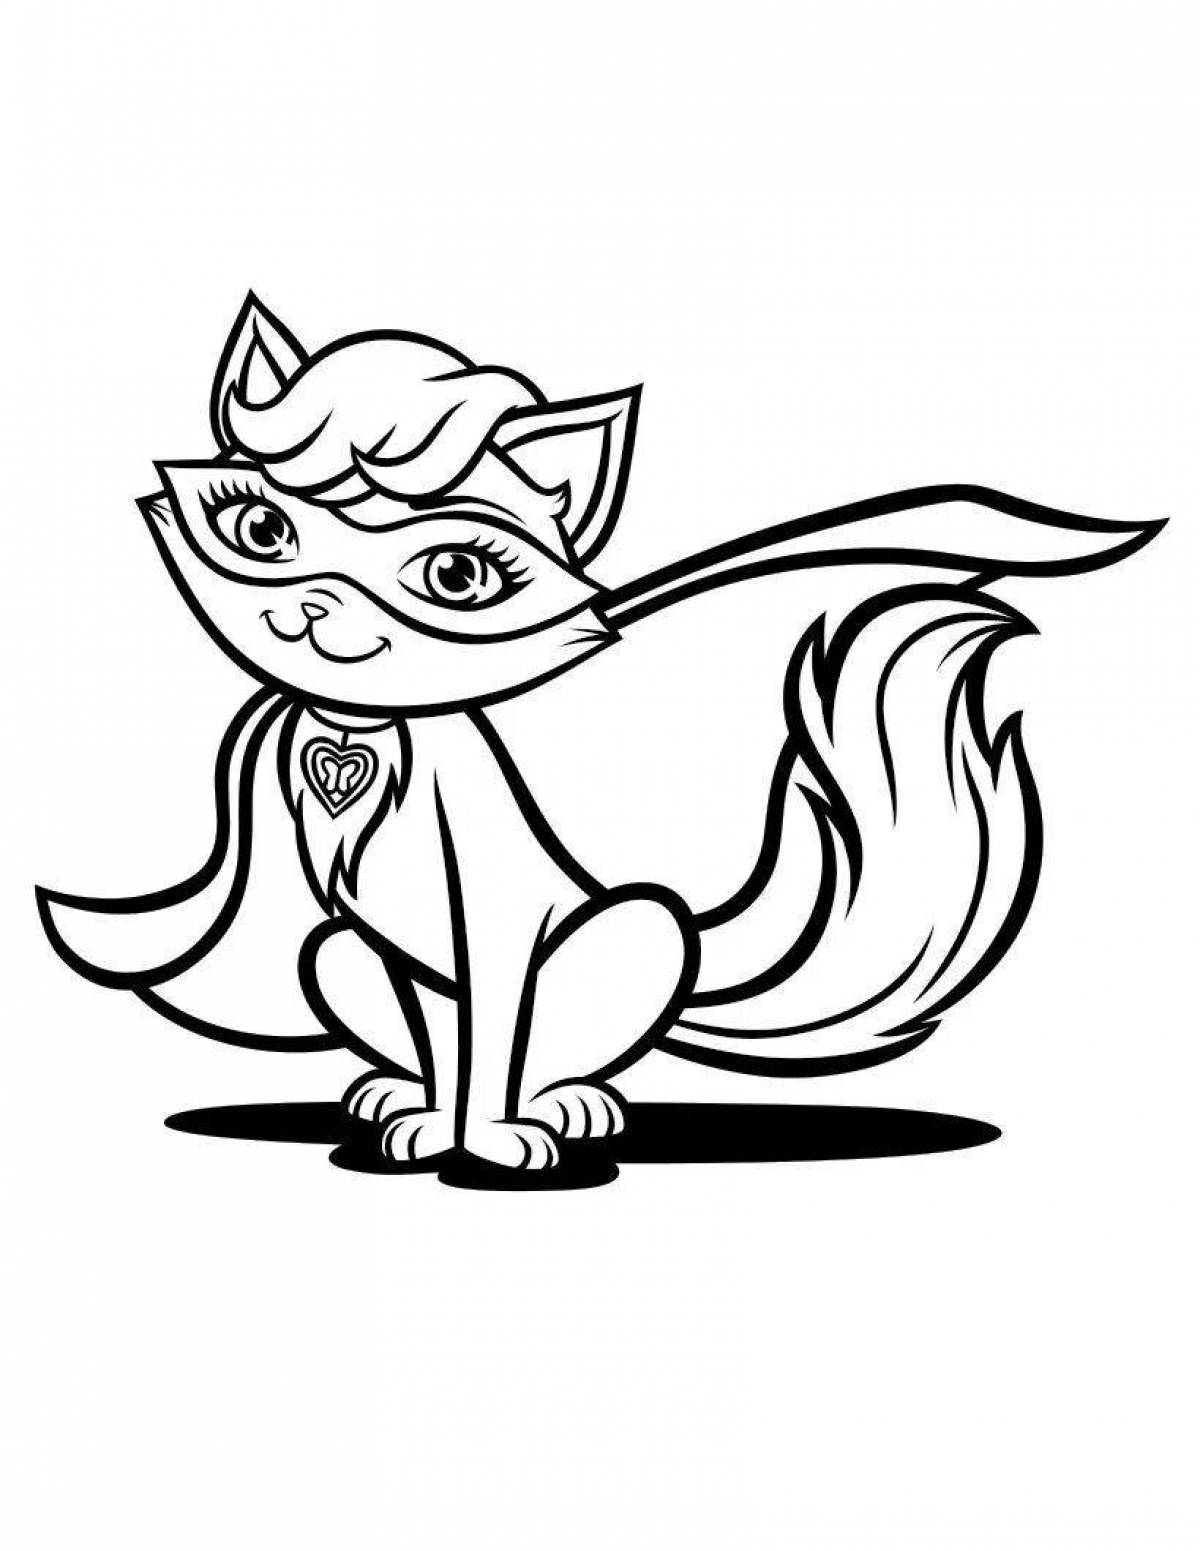 Felicity glowing cat coloring page